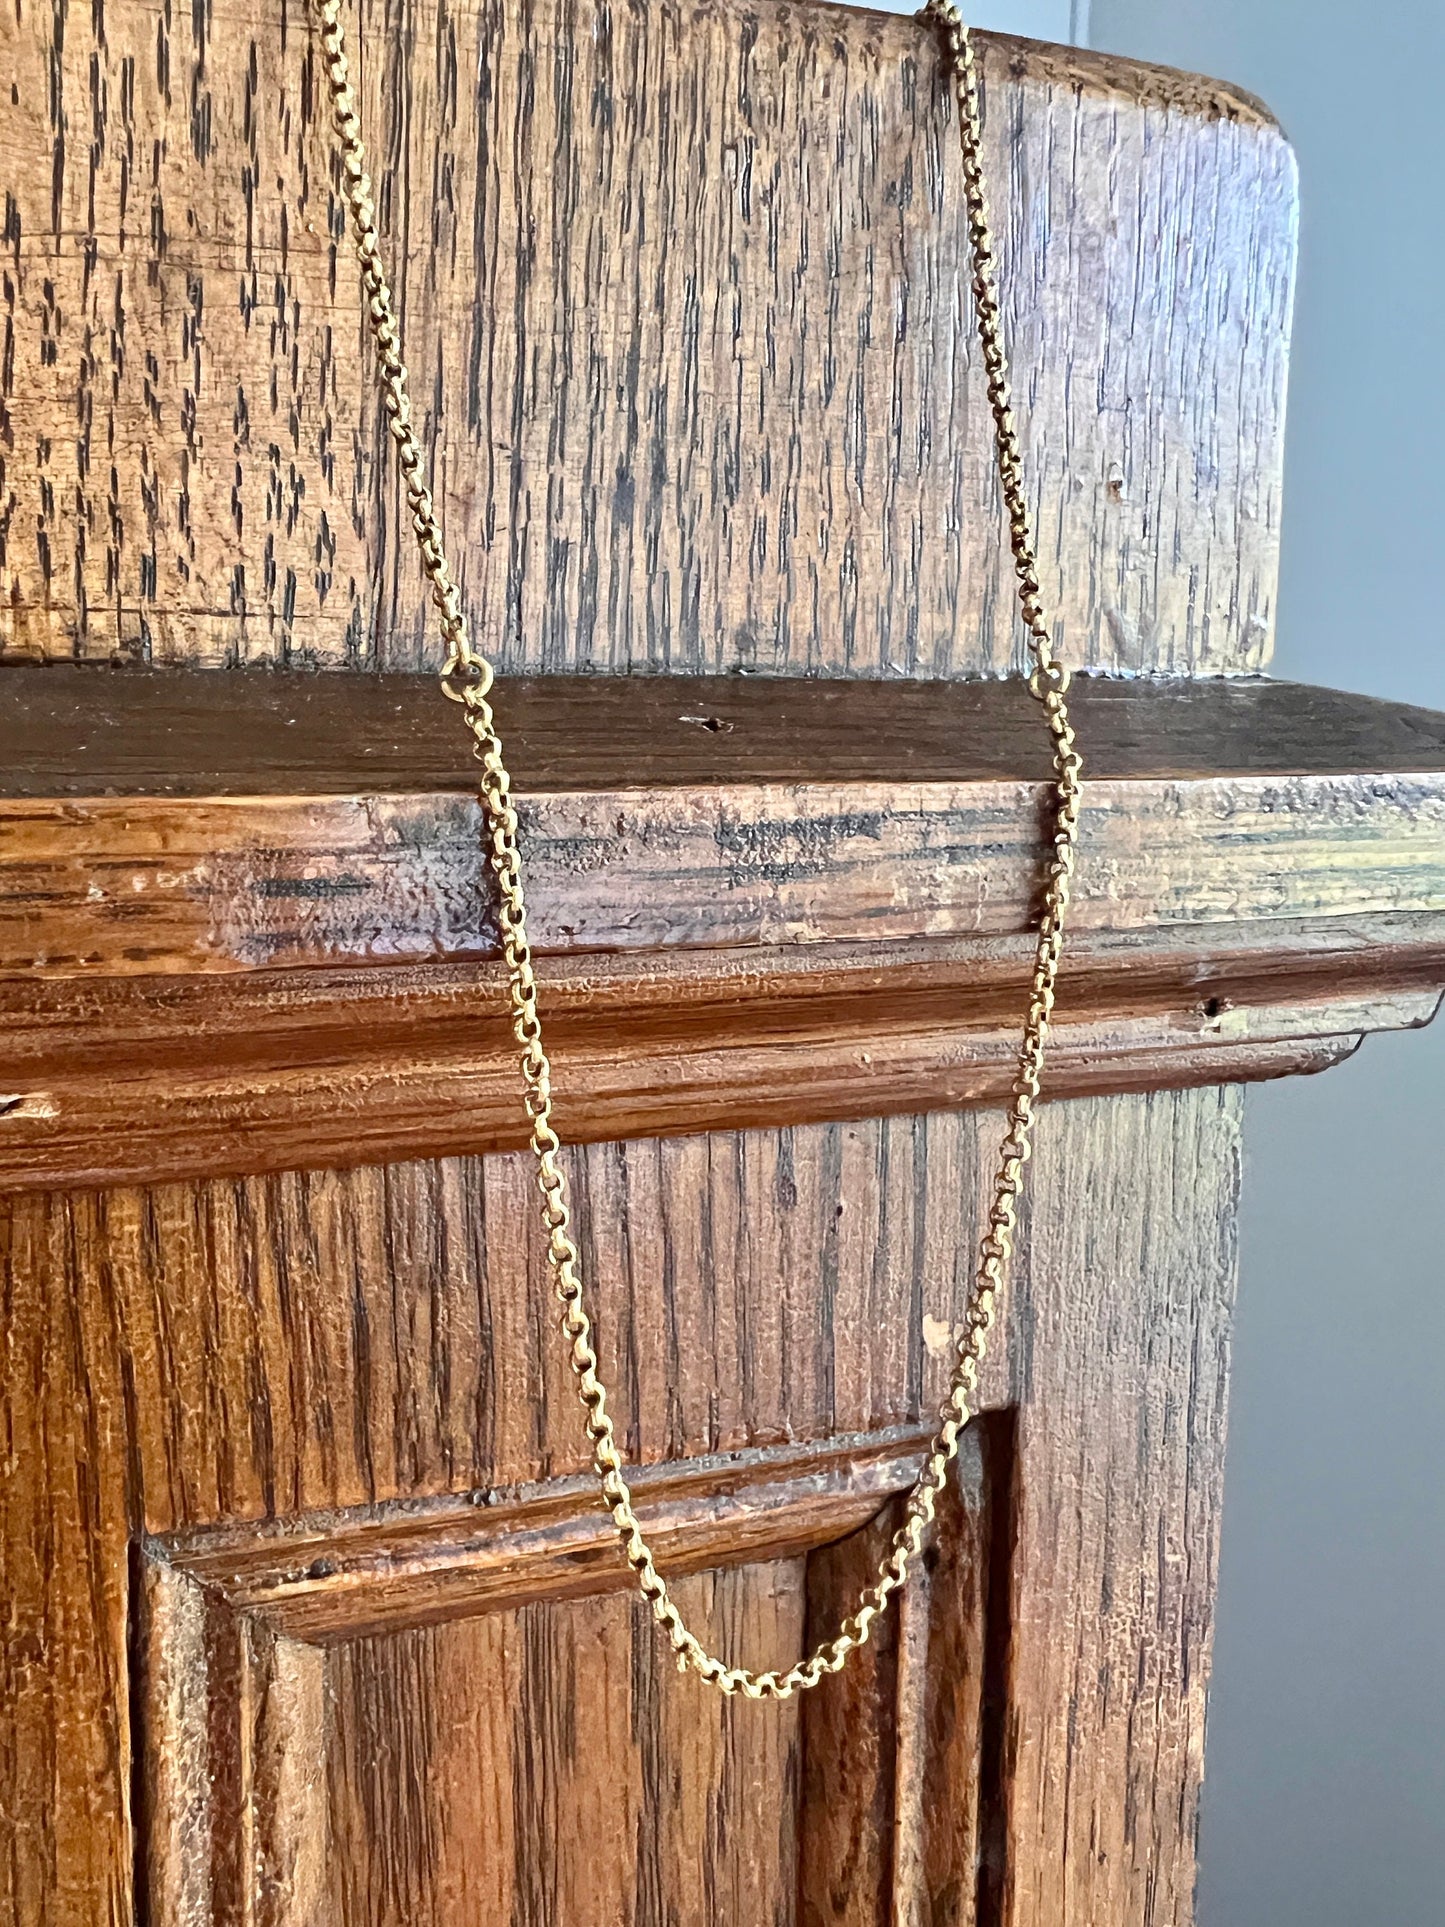 VICTORIAN Antique Dainty 14k Gold Cable Chain Necklace Pendant Charm Holder Romantic Gift Timeless Glowing Patina Neckmess Neckstack